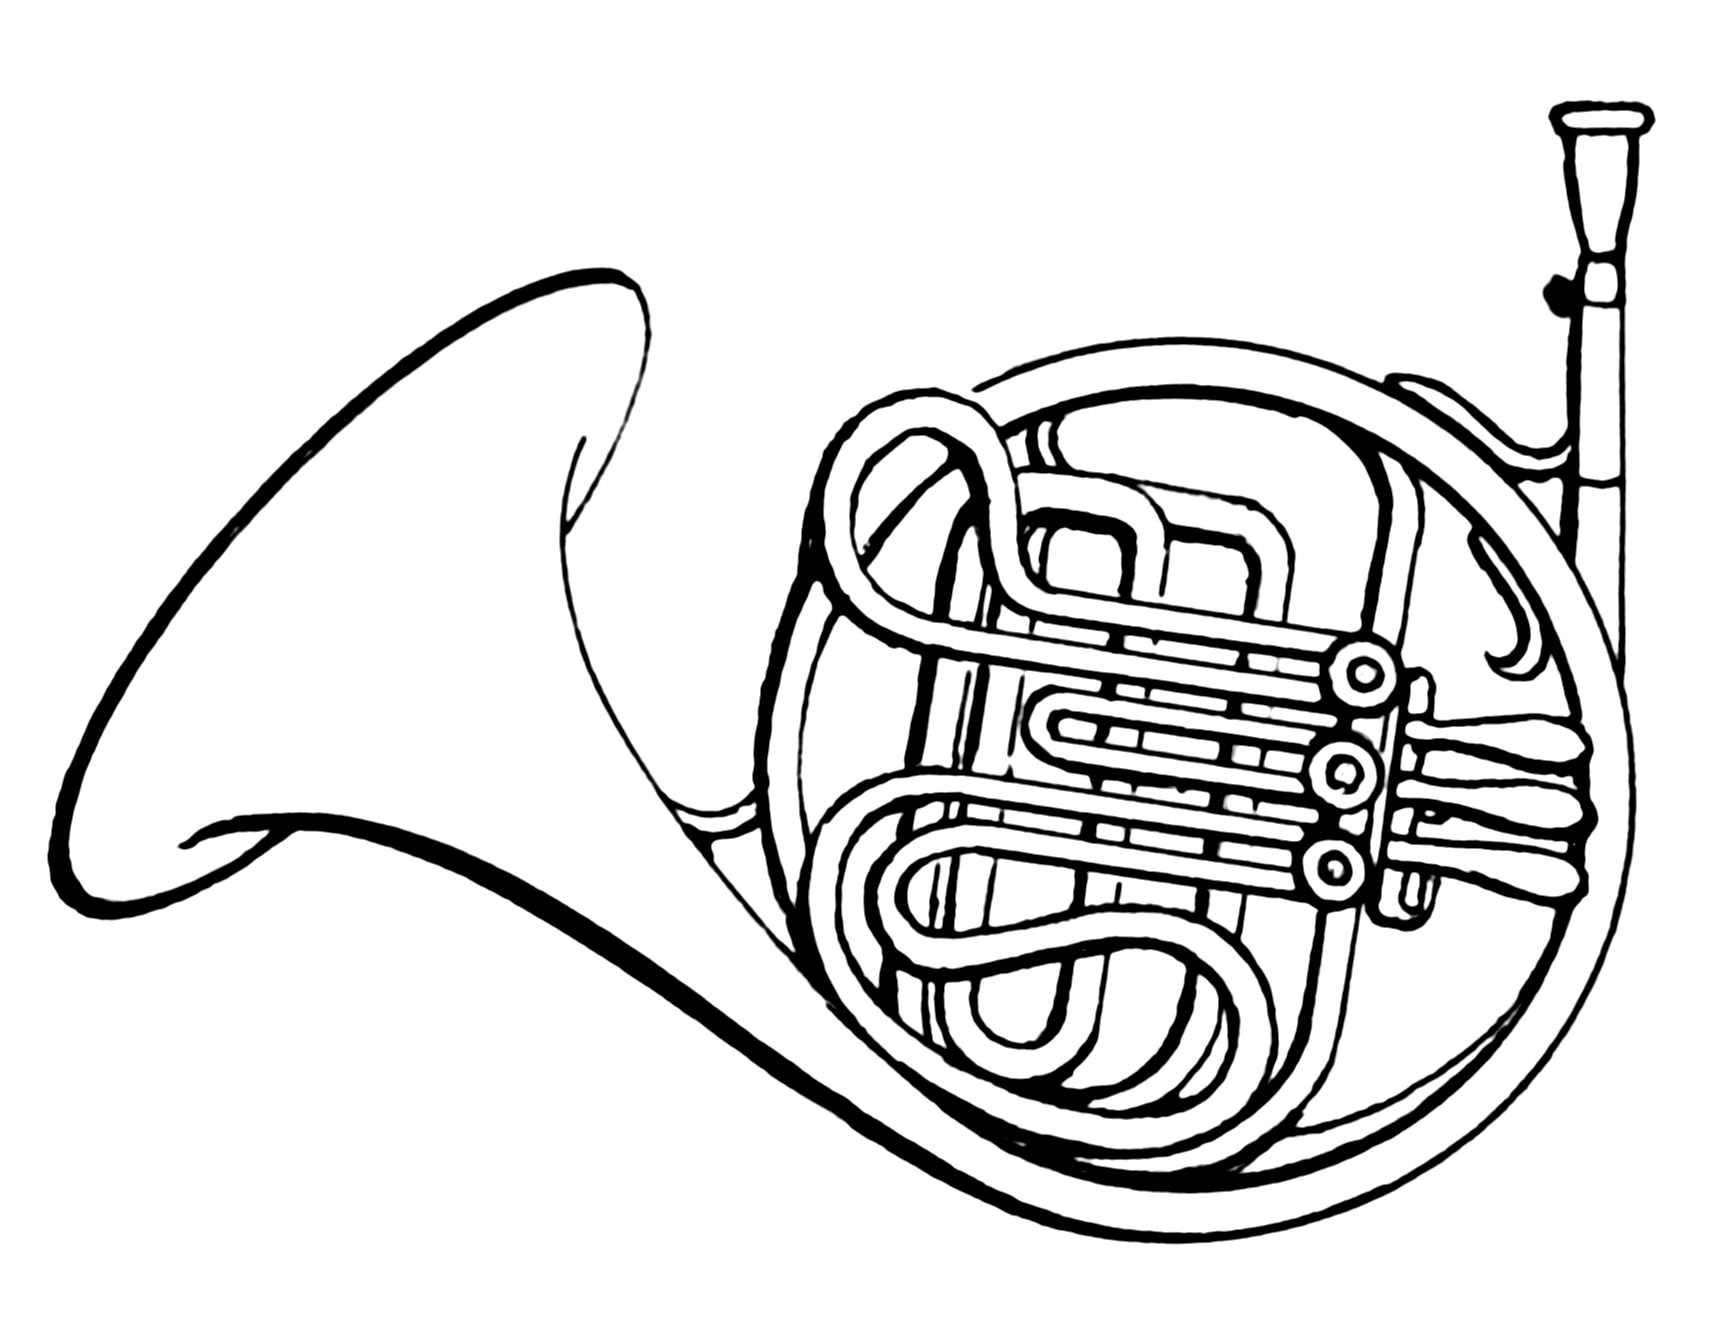 Clipartbest Com - French Horn Clipart